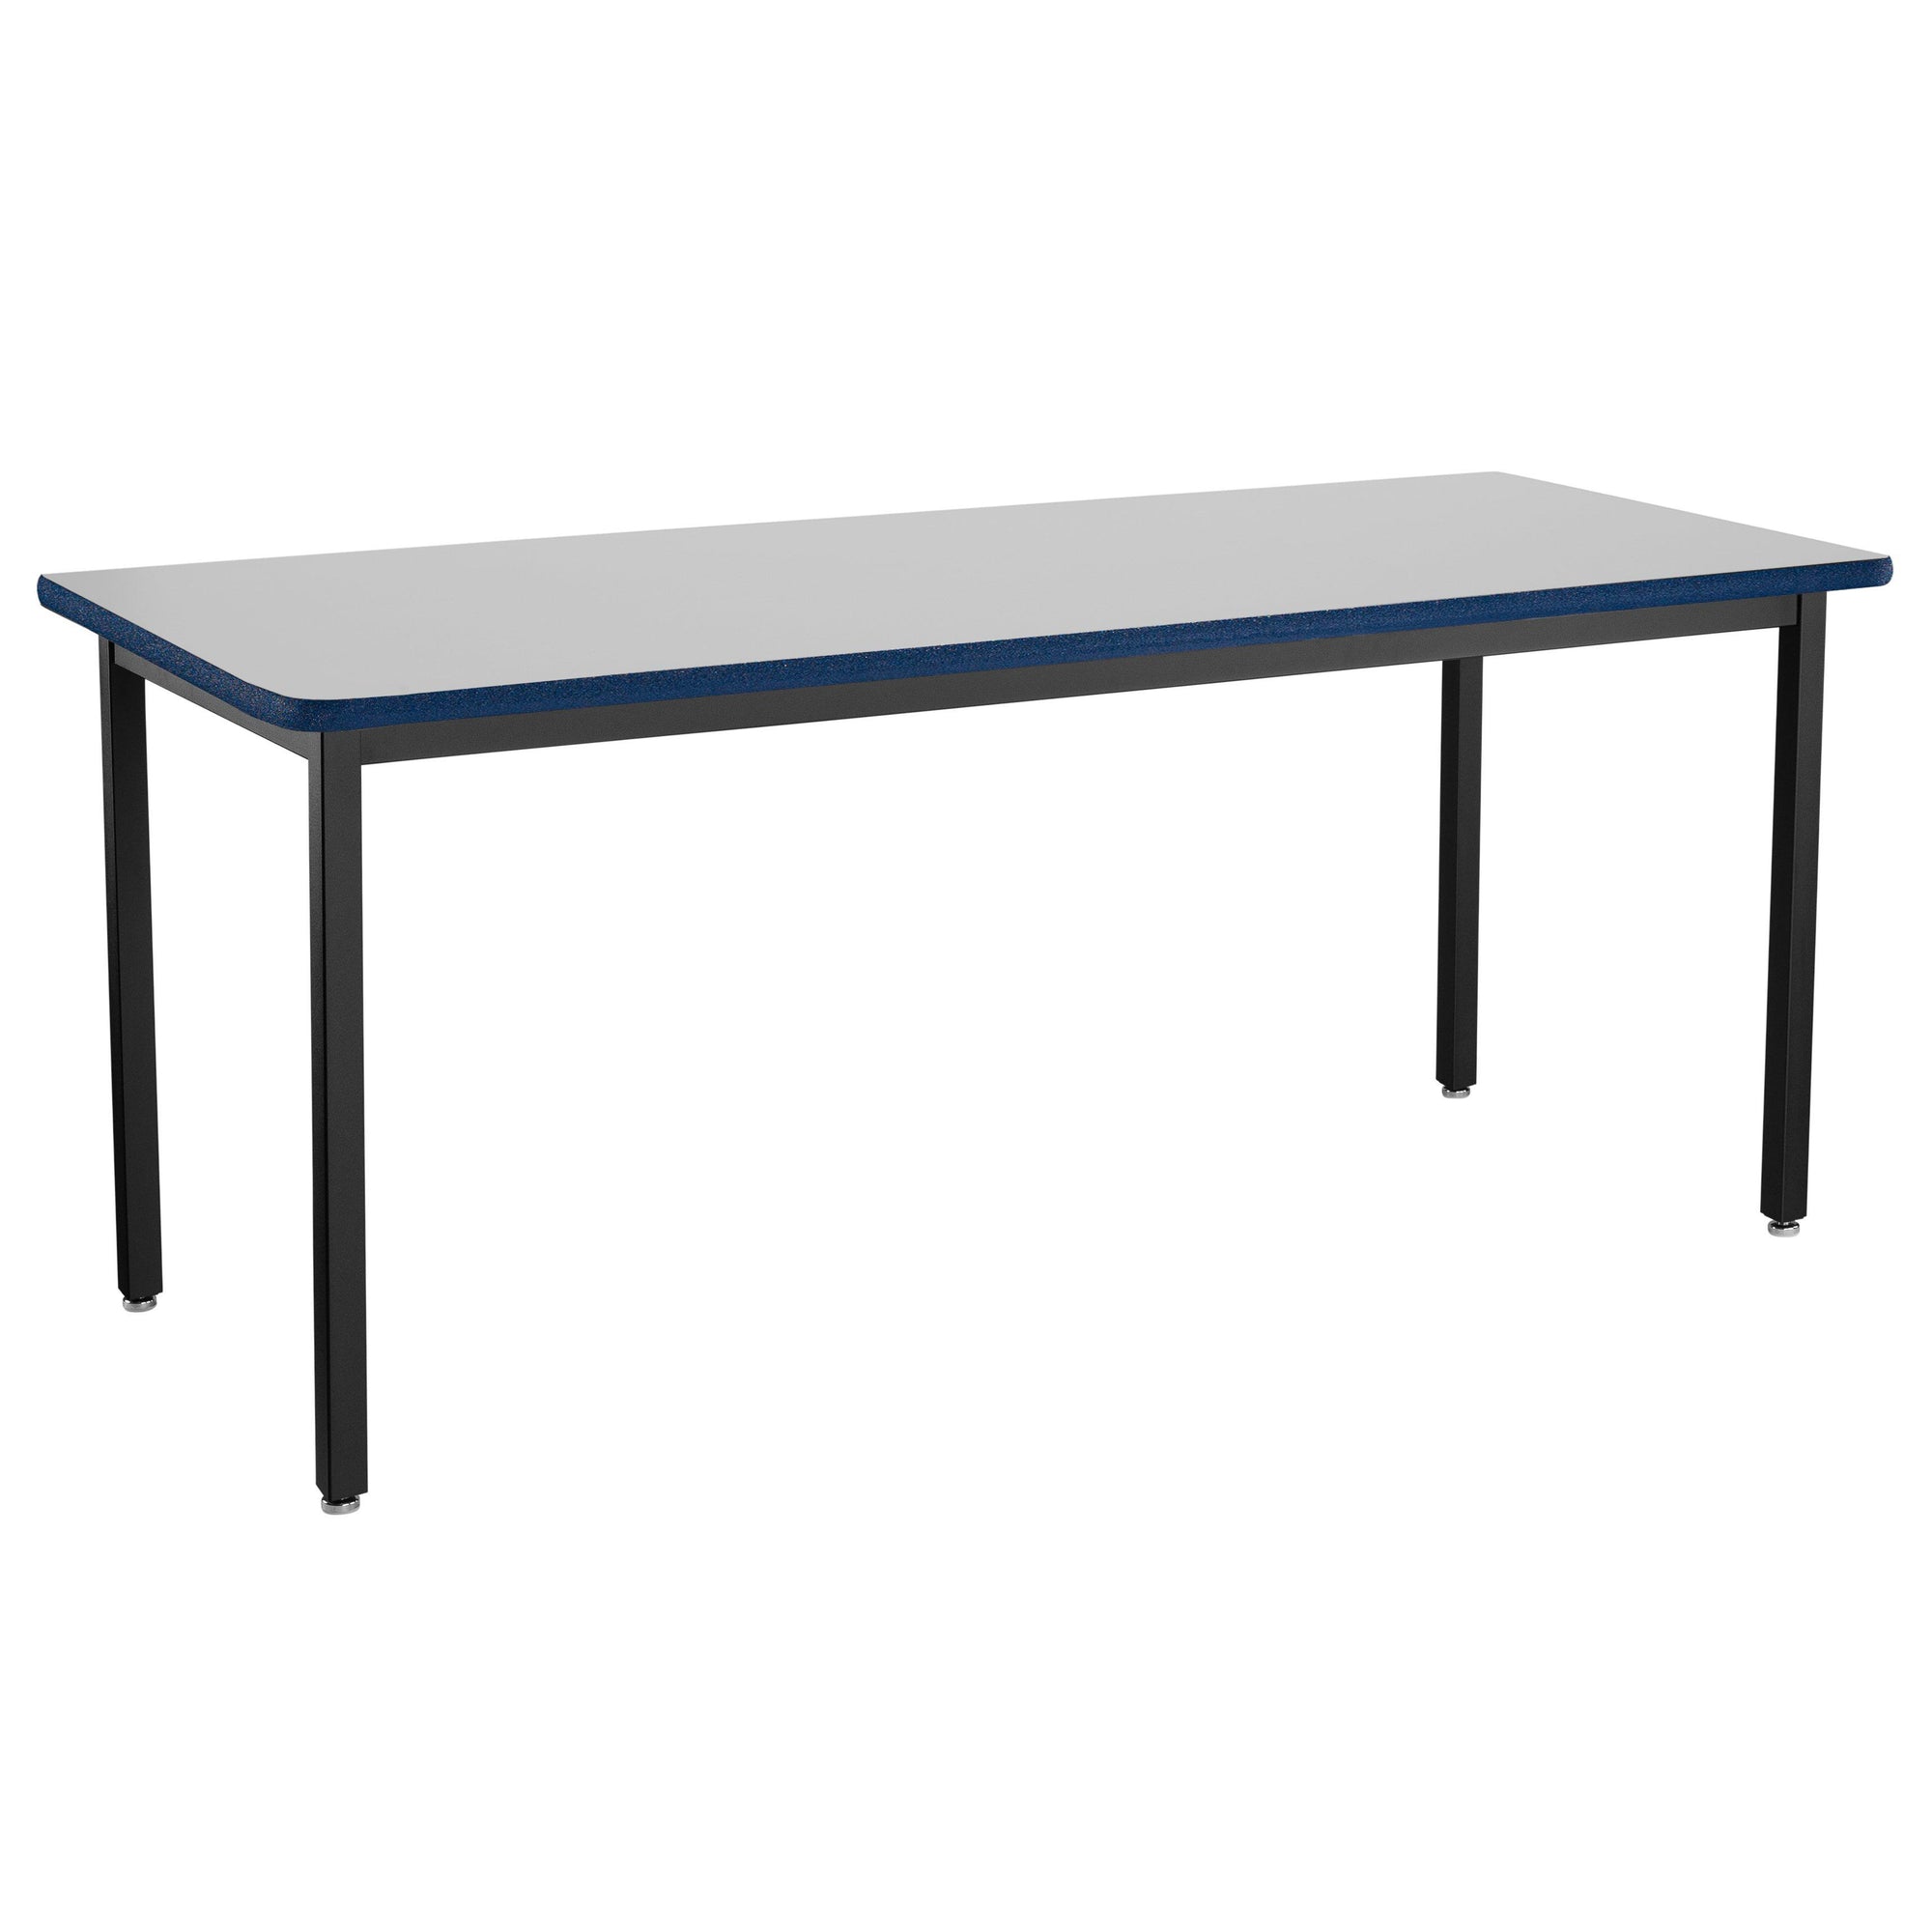 Heavy-Duty Fixed Height Utility Table, Black Frame, 30" x 84", Supreme High-Pressure Laminate Top with Black ProtectEdge